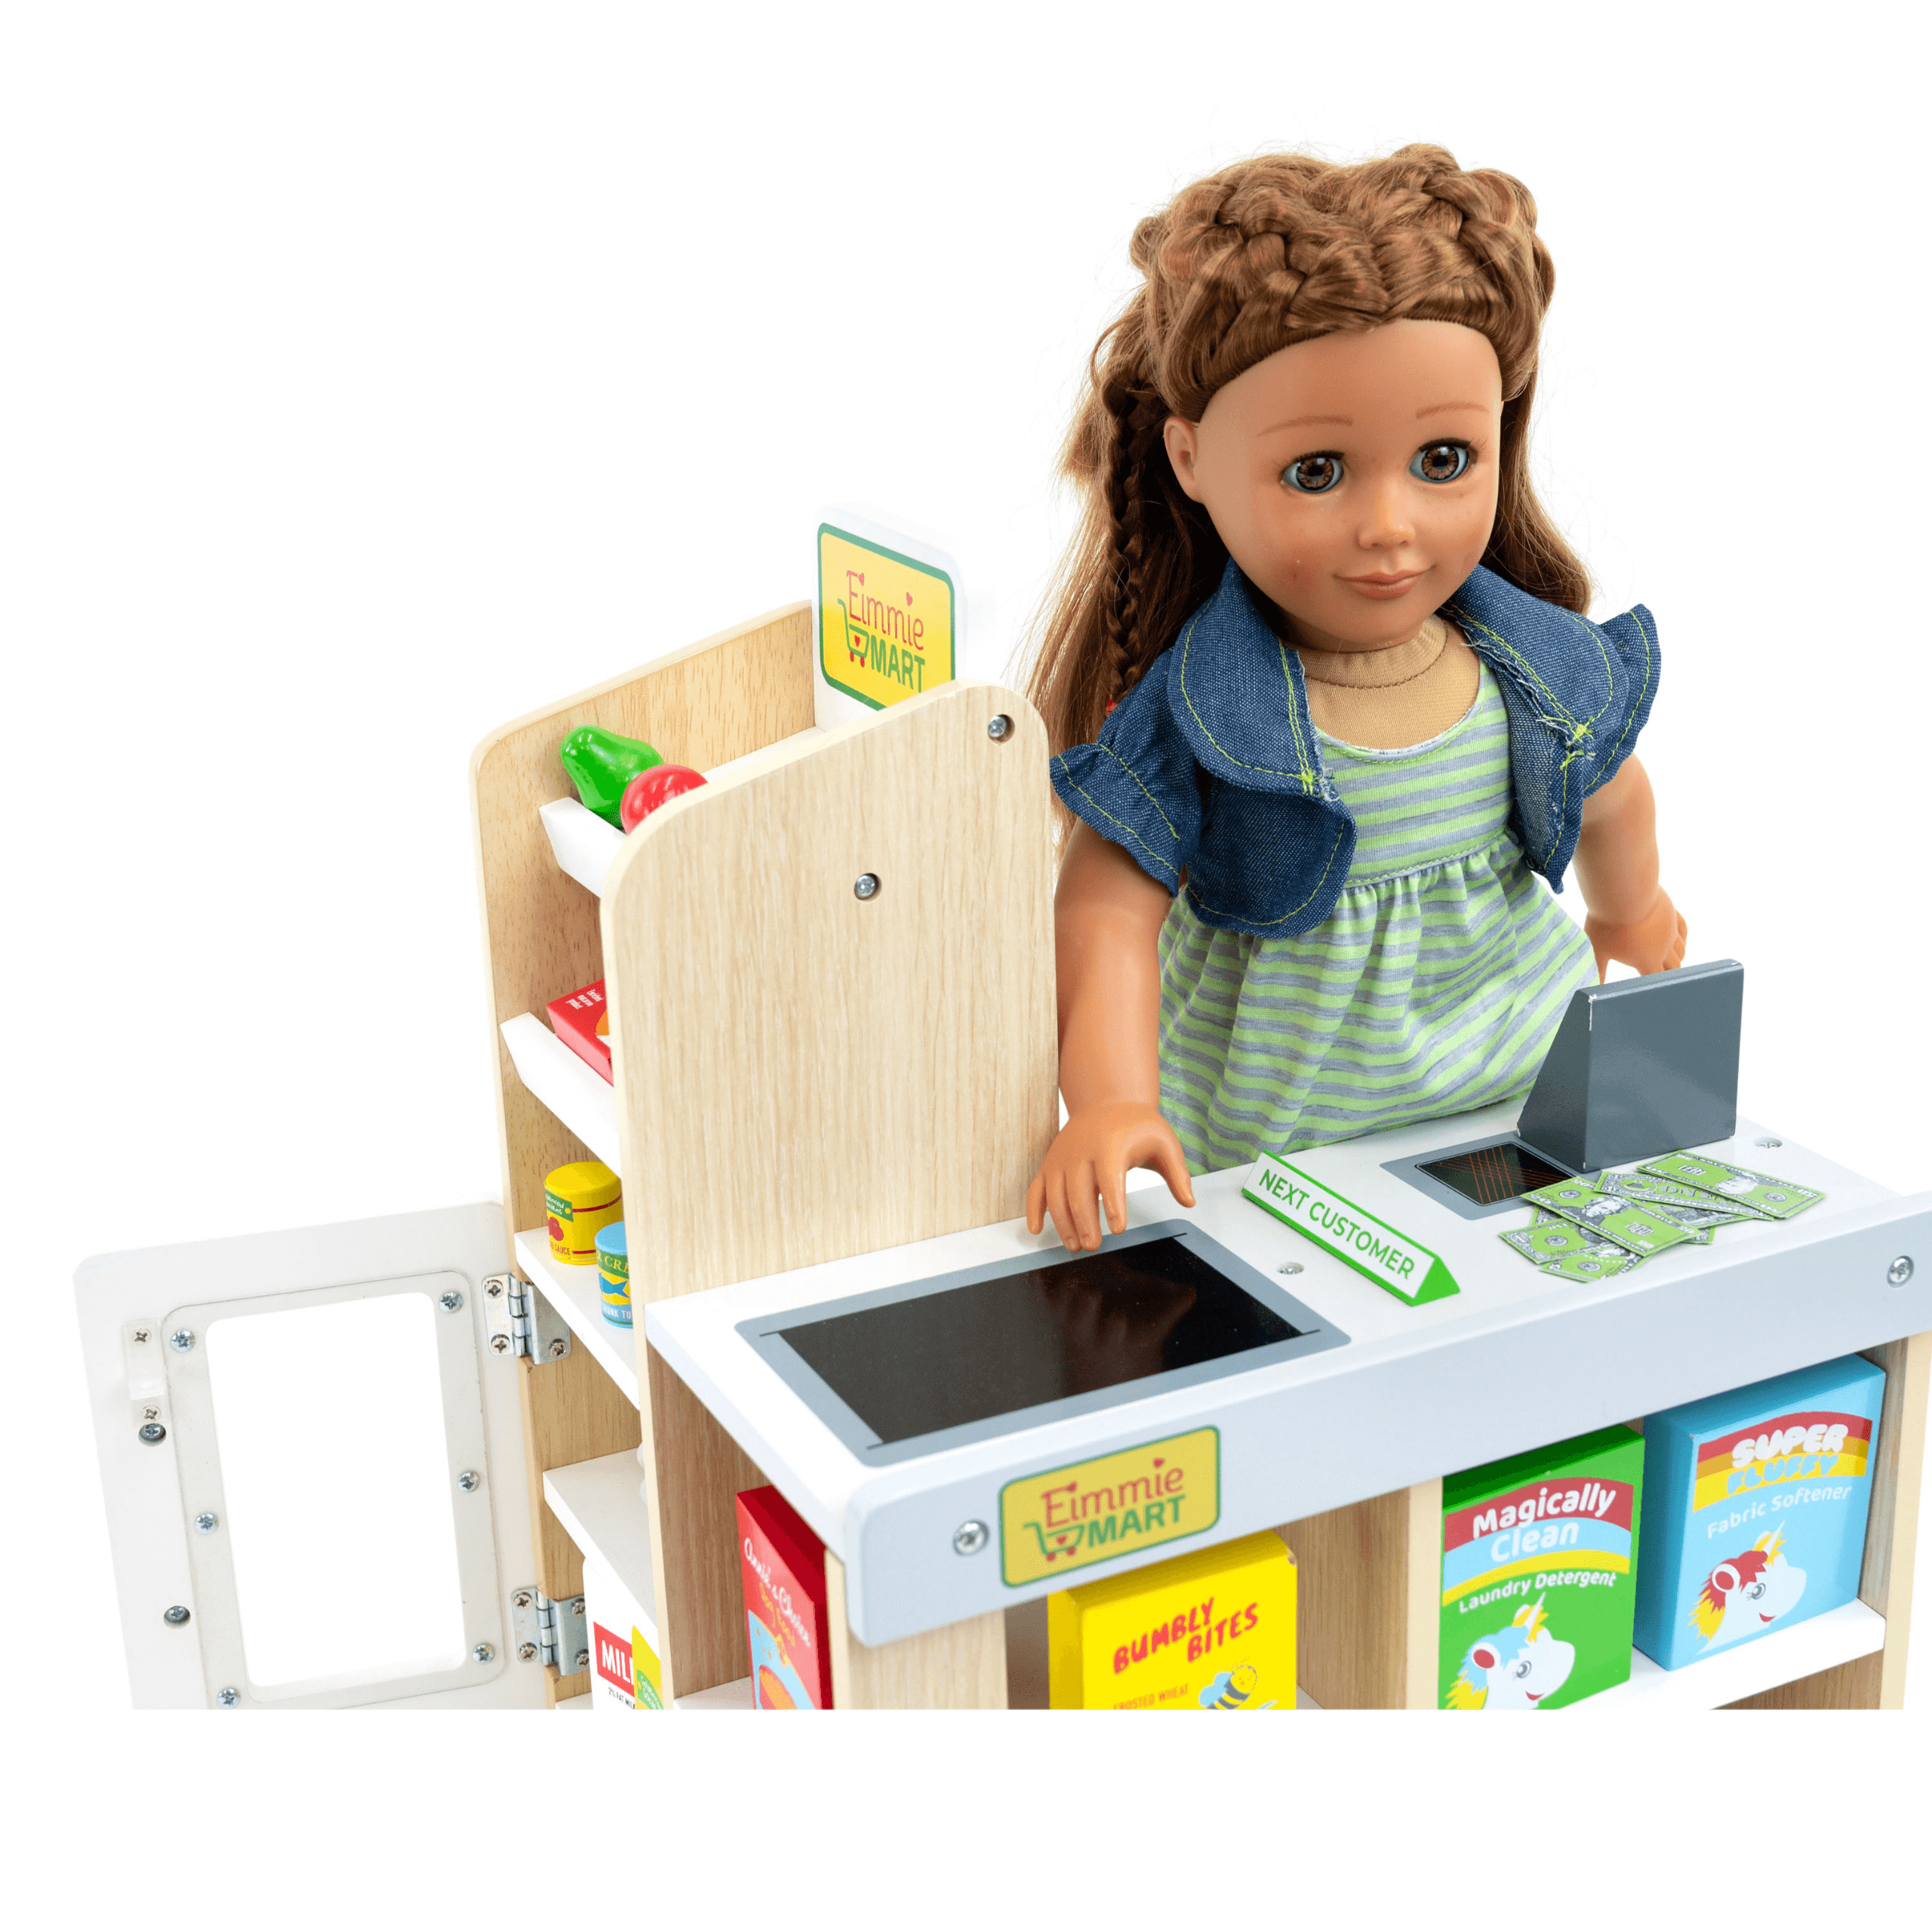 Playtime by Eimmie Furniture Grocery Store Set with Accessories-18 Inch Doll - OrangeOnions Wholesale